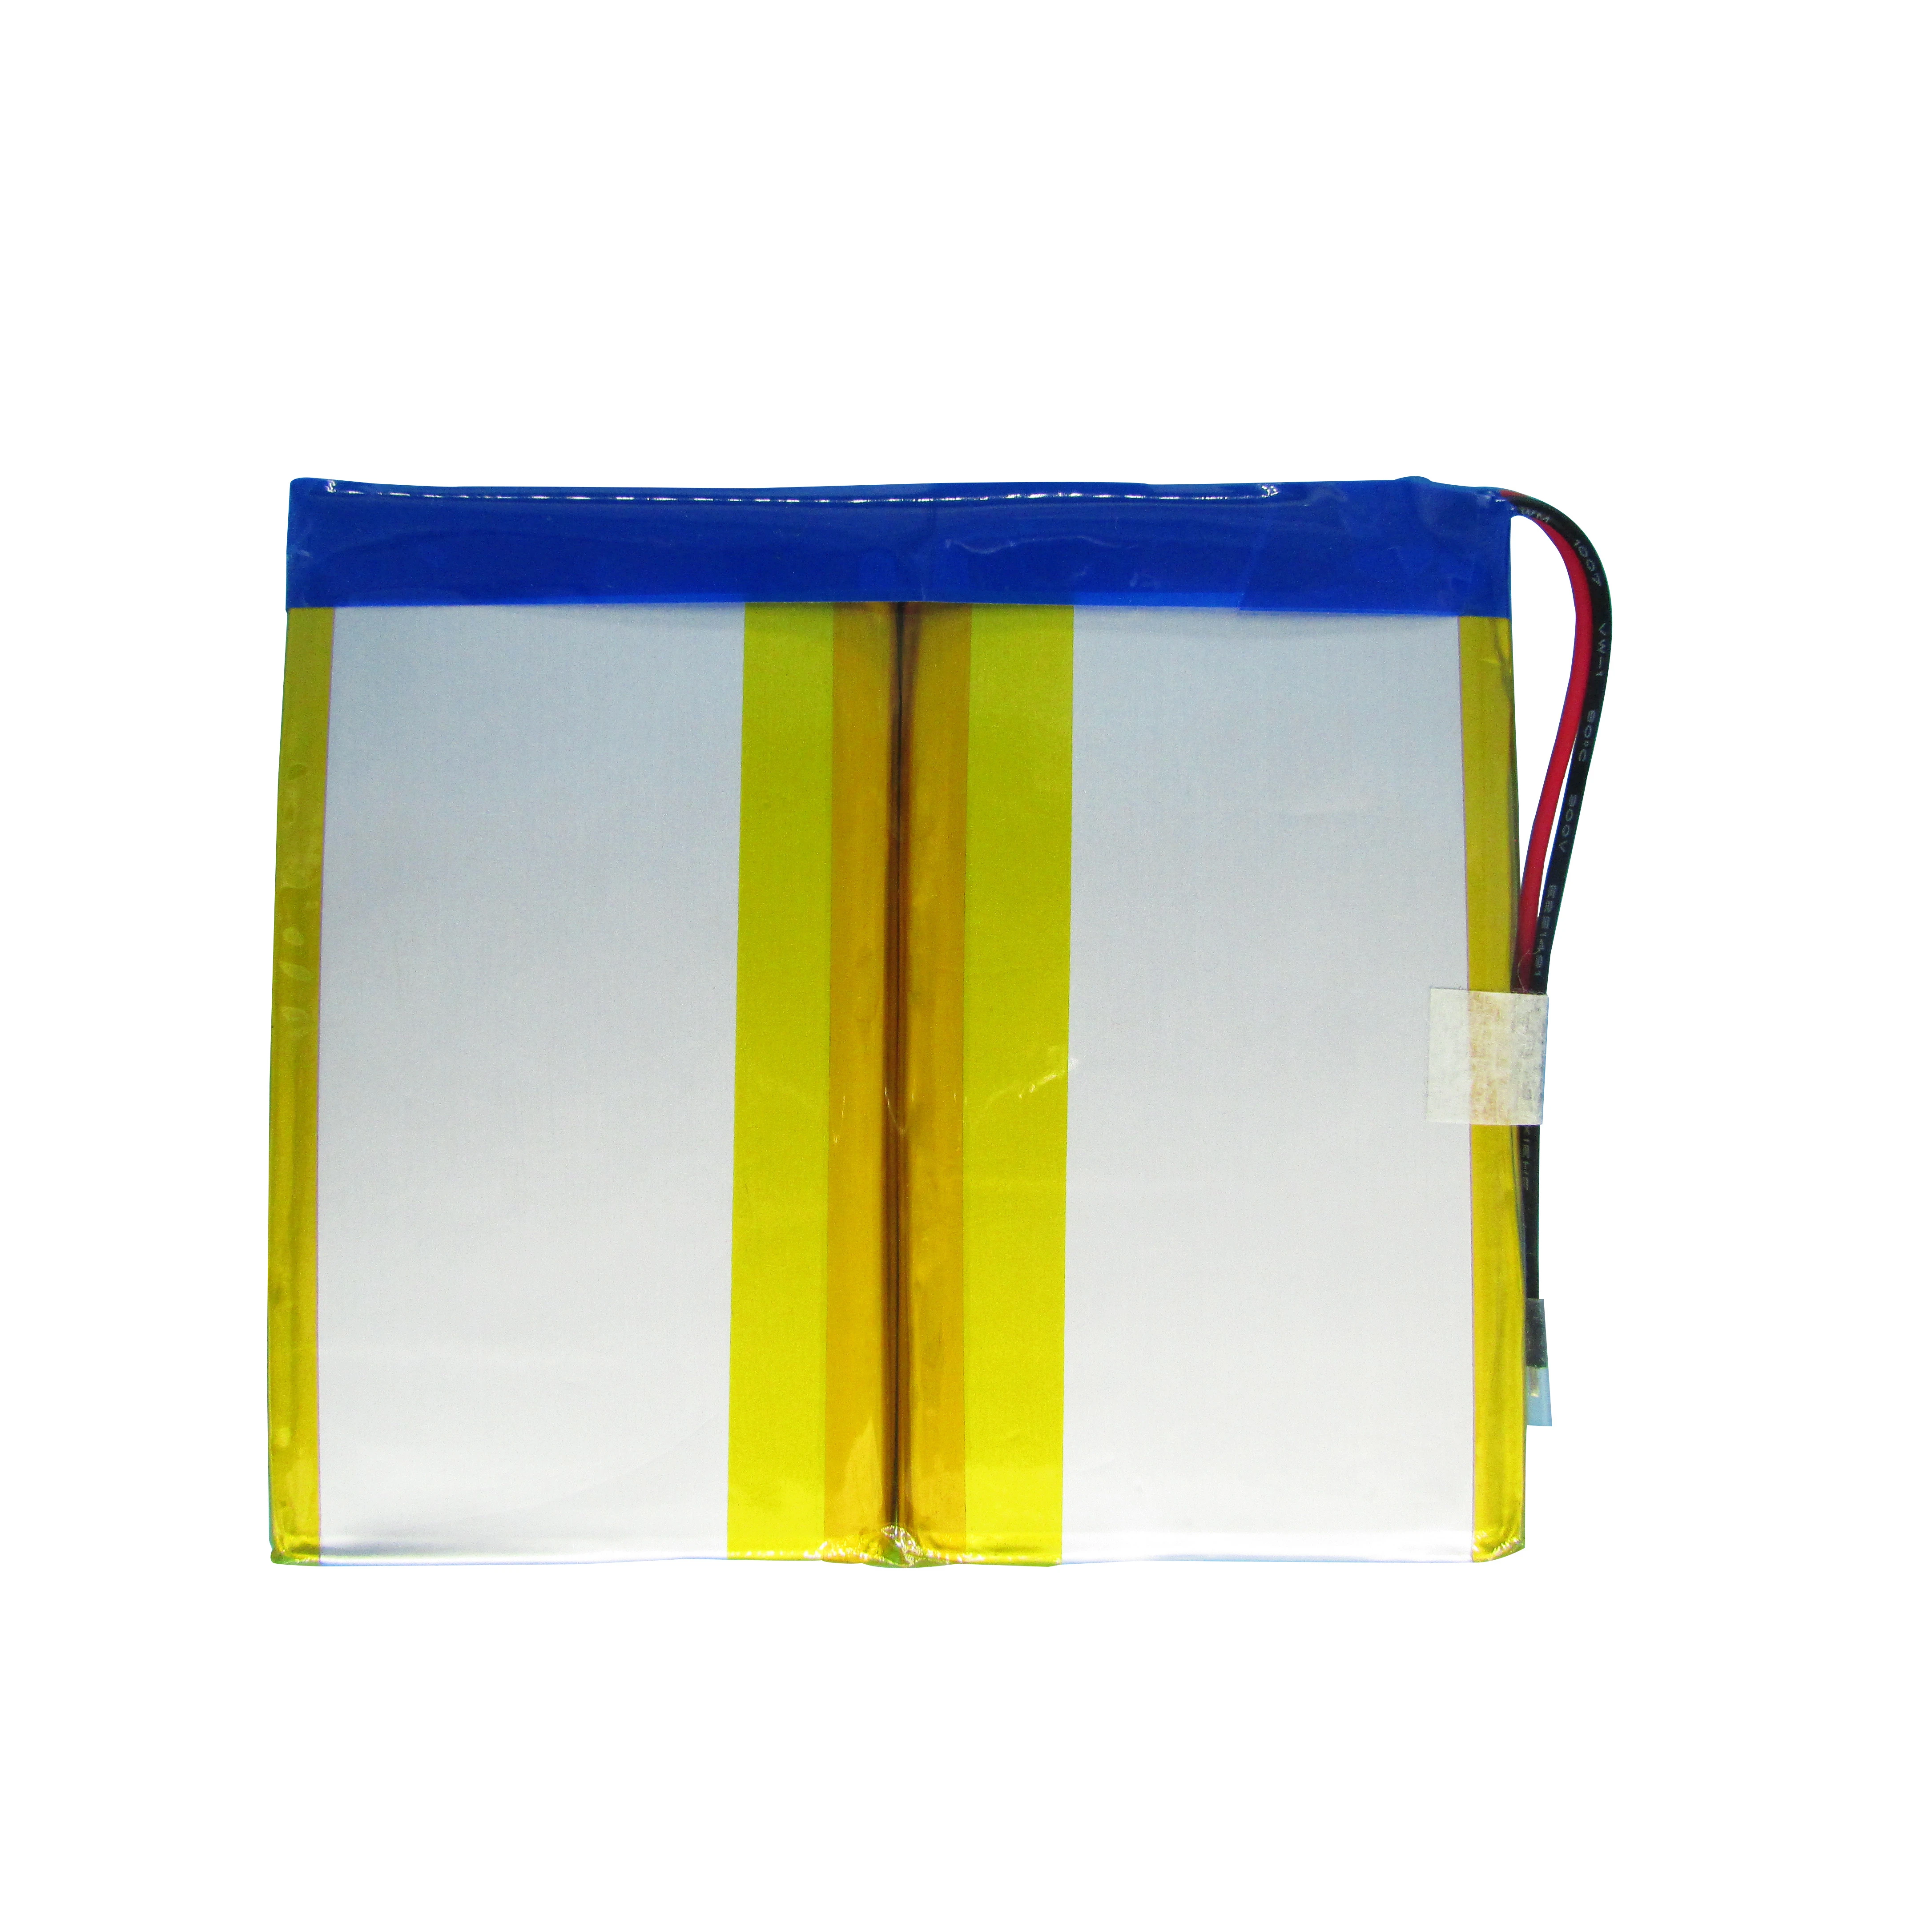 7.4V 4000mAh 805080  lithium polymer rechargeable Battery Pack